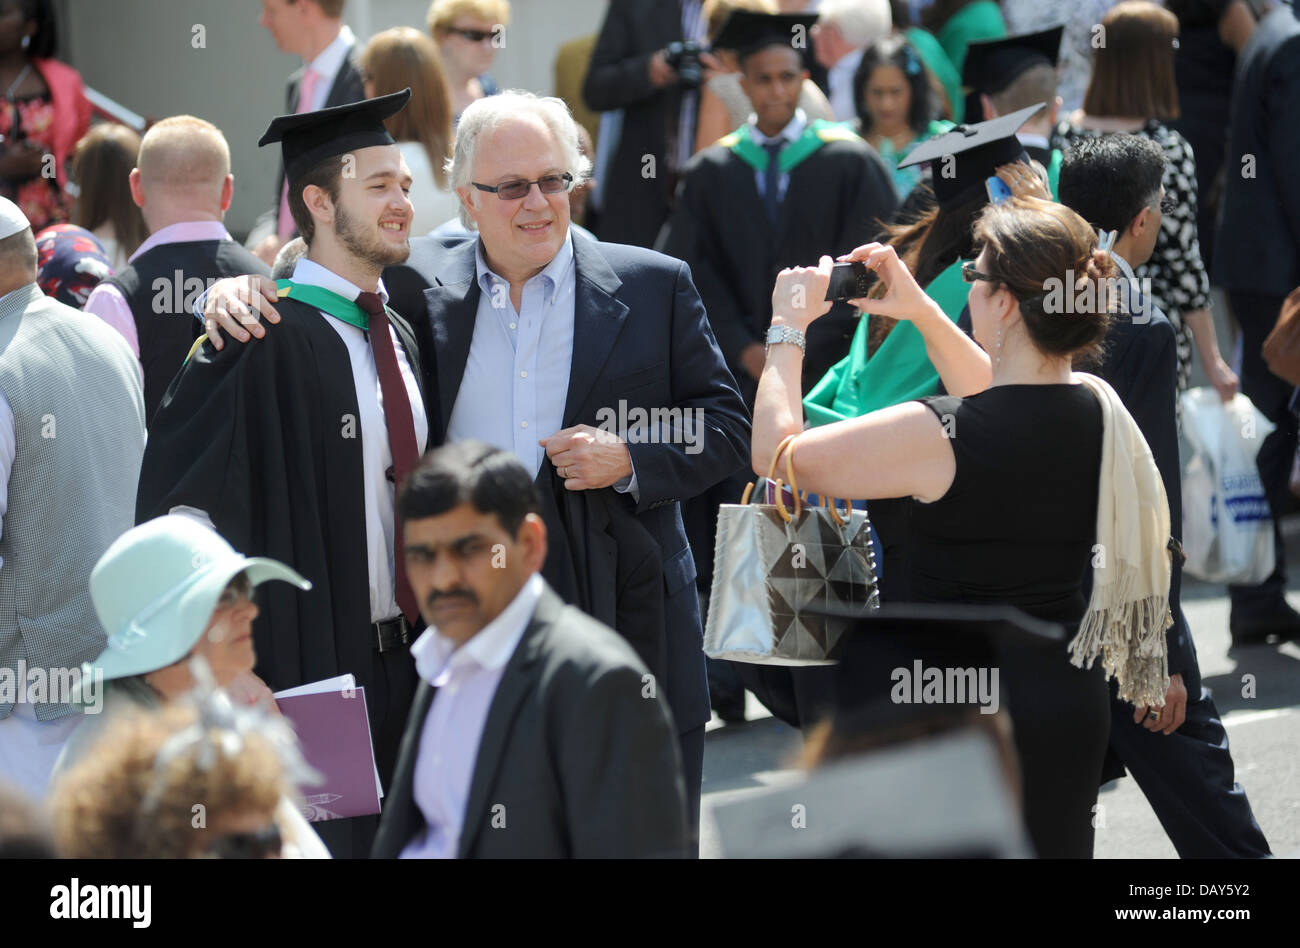 STUDENT  AT A BRITISH UNIVERSITY CELEBRATING ON GRADUATION DAY RE EDUCATION DEGREES LOANS STUDENT JOBS CAREERS FOREIGN UK Stock Photo